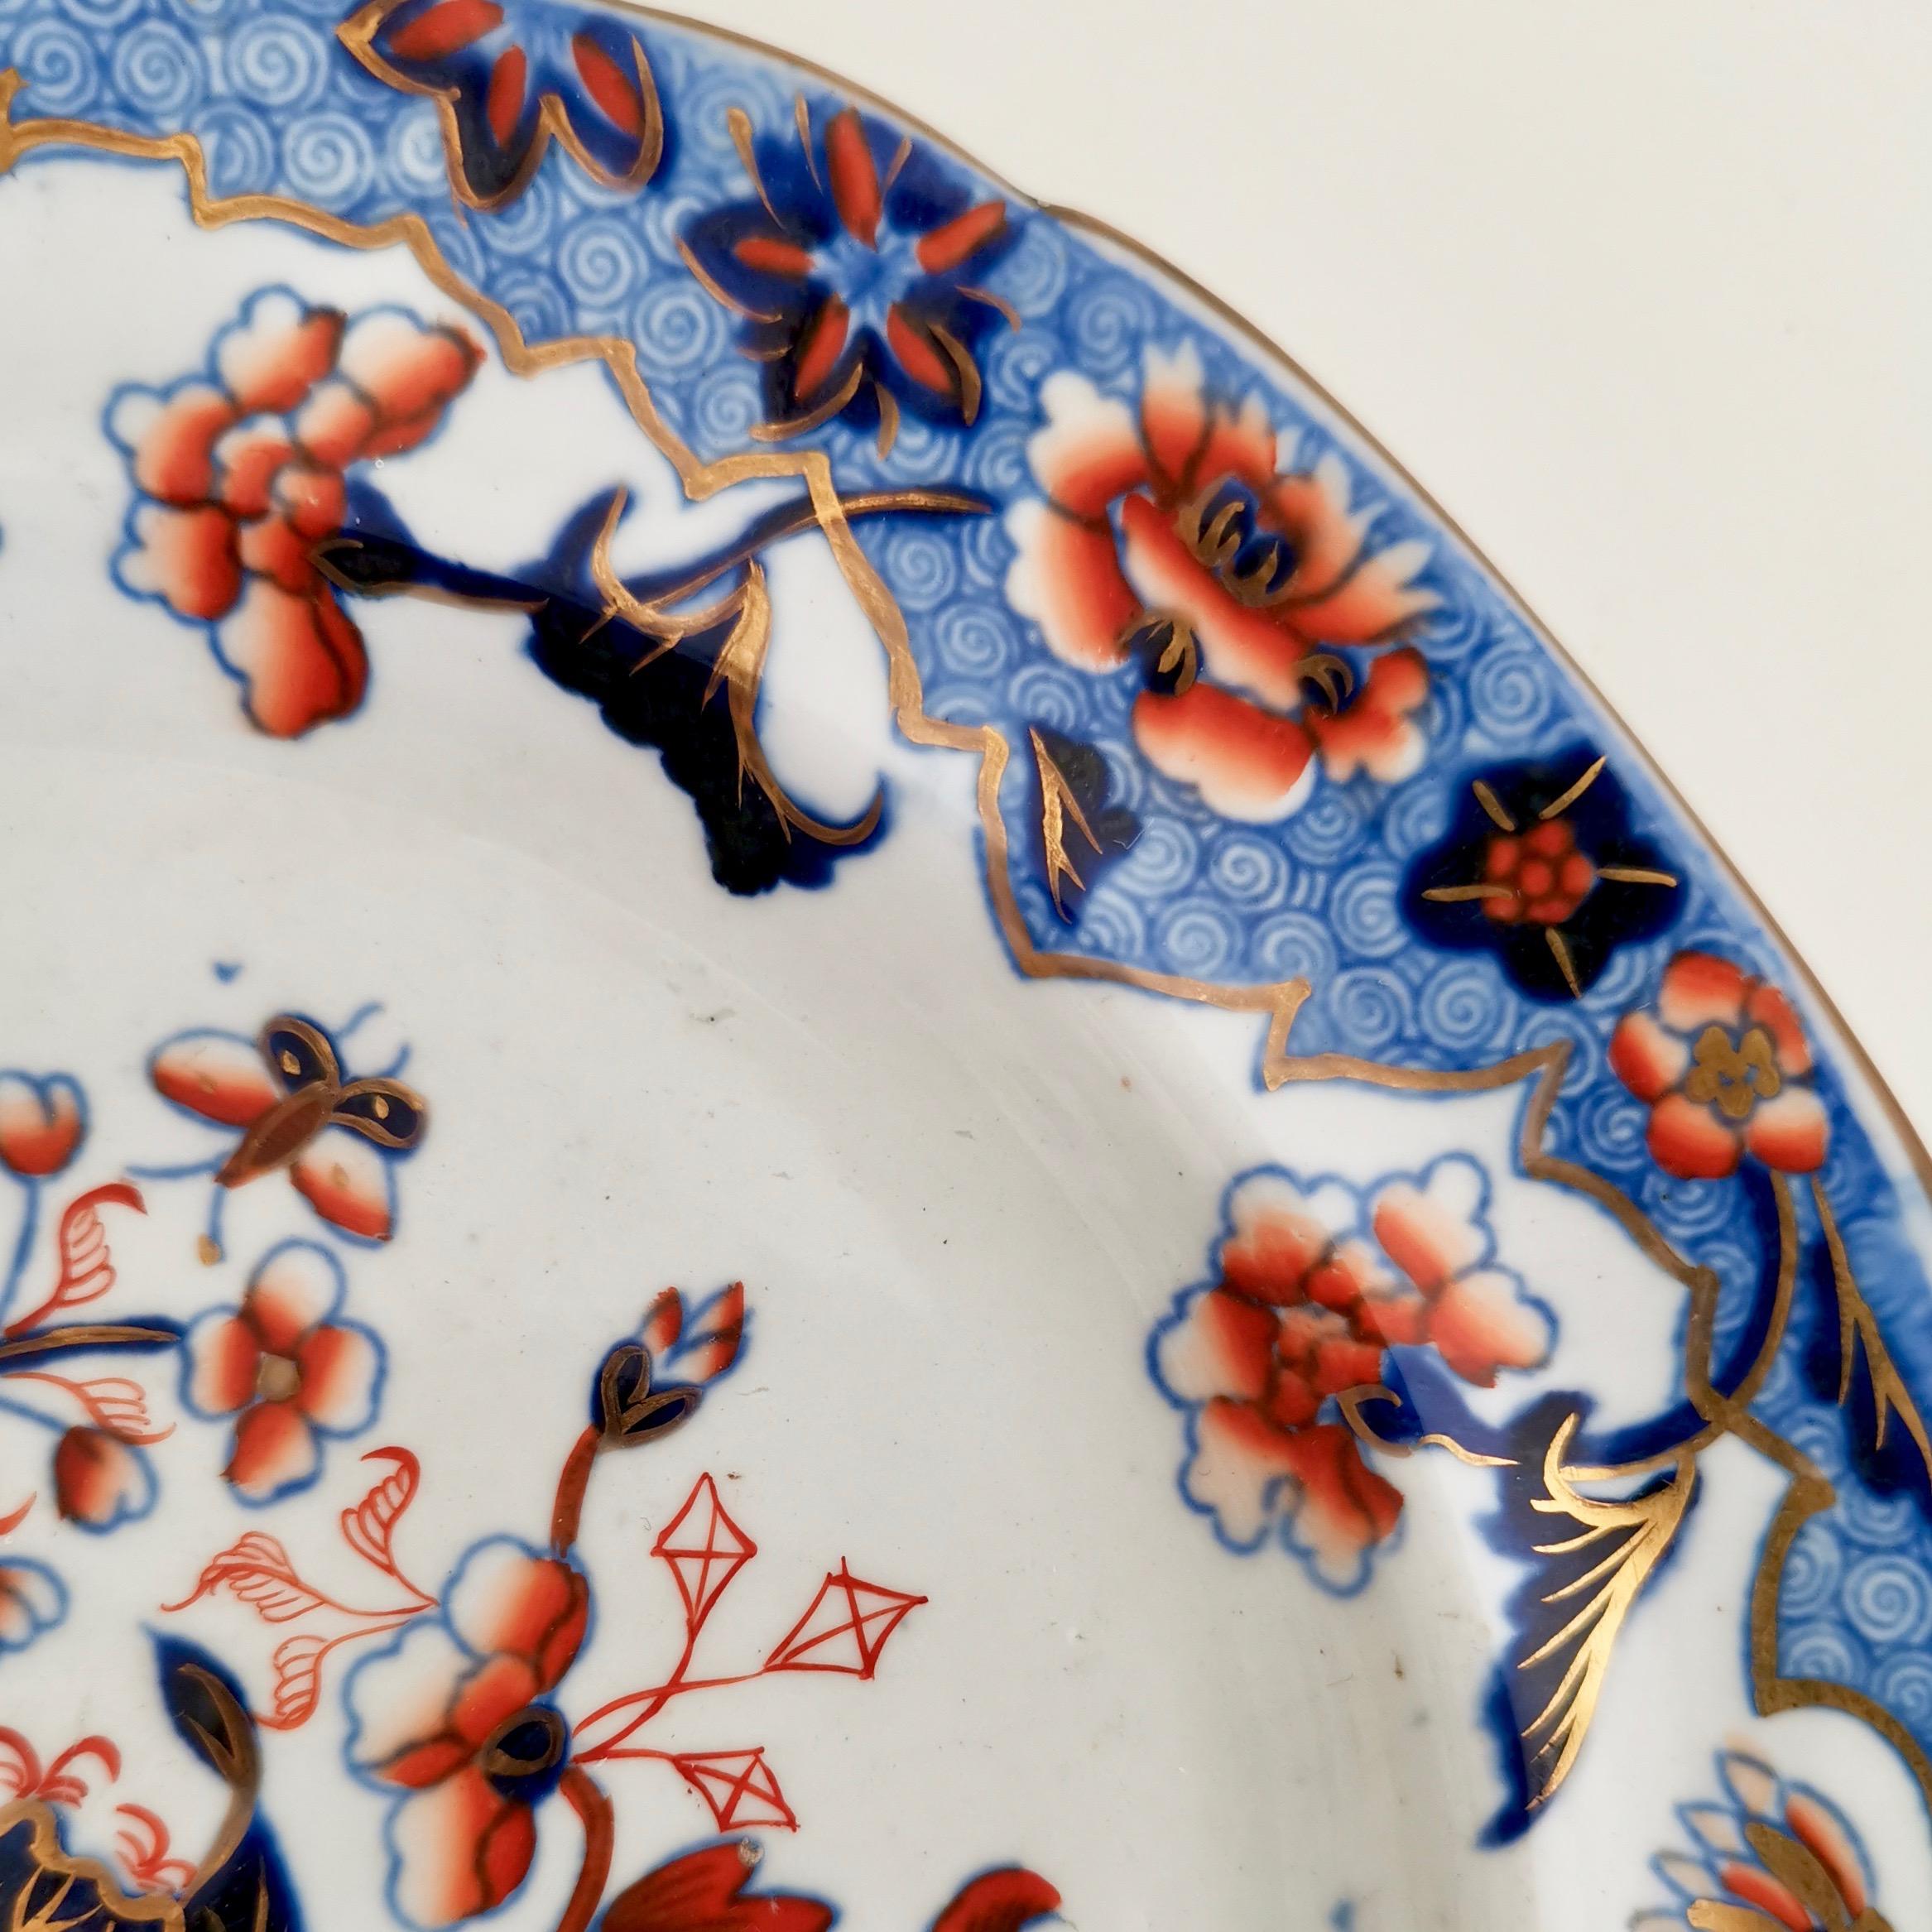 Hand-Painted Spode Plate, Bang Up Pattern Chinoiserie New Stone China, Regency 1822-1833